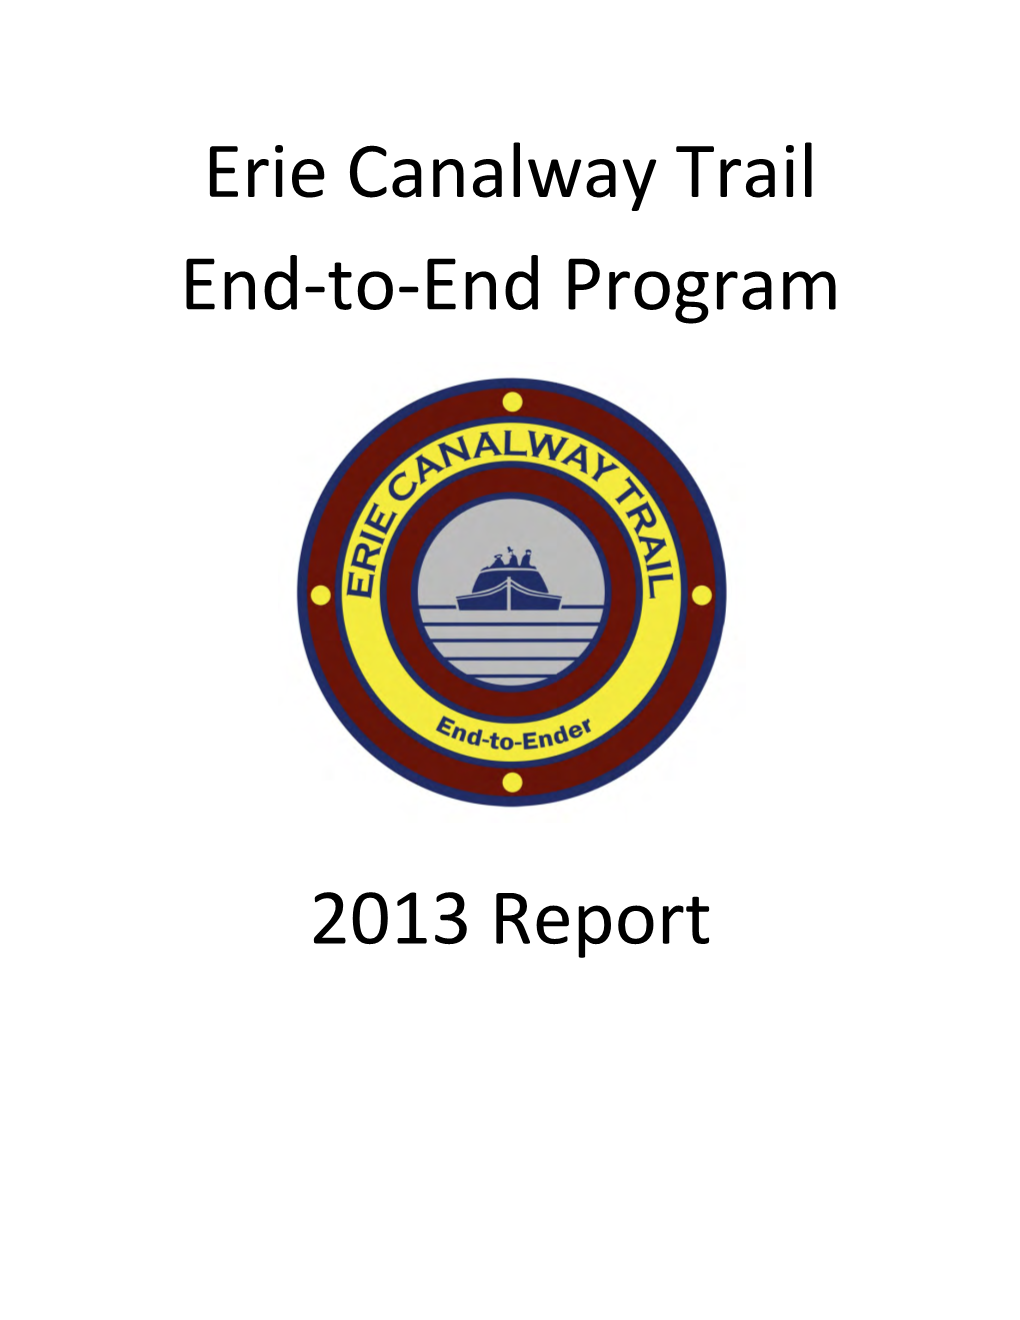 Erie Canalway Trail End-To-End Program 2013 Report